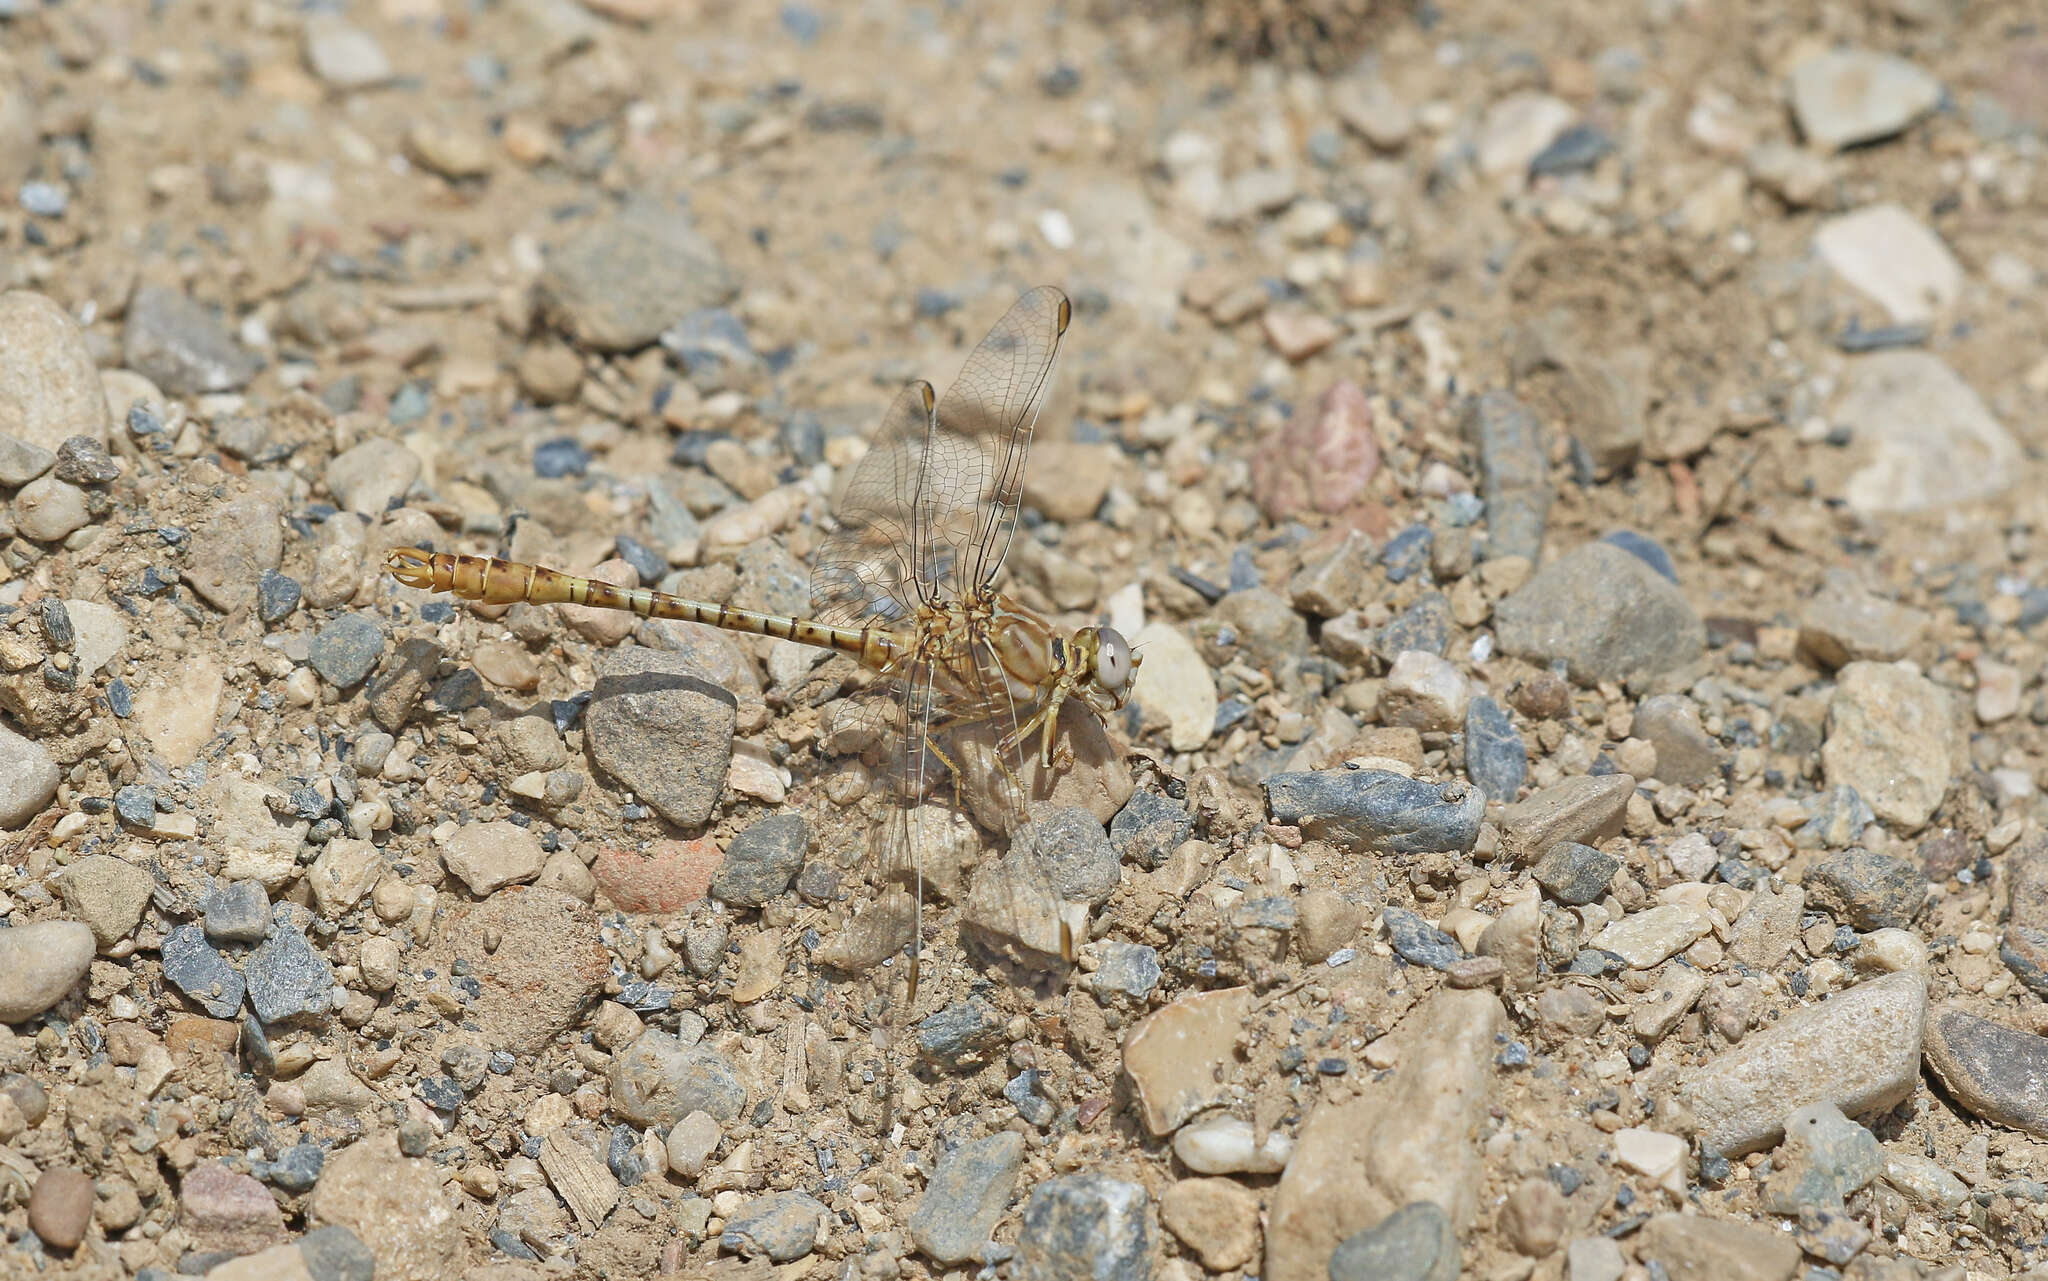 Image of Faded Pincertail